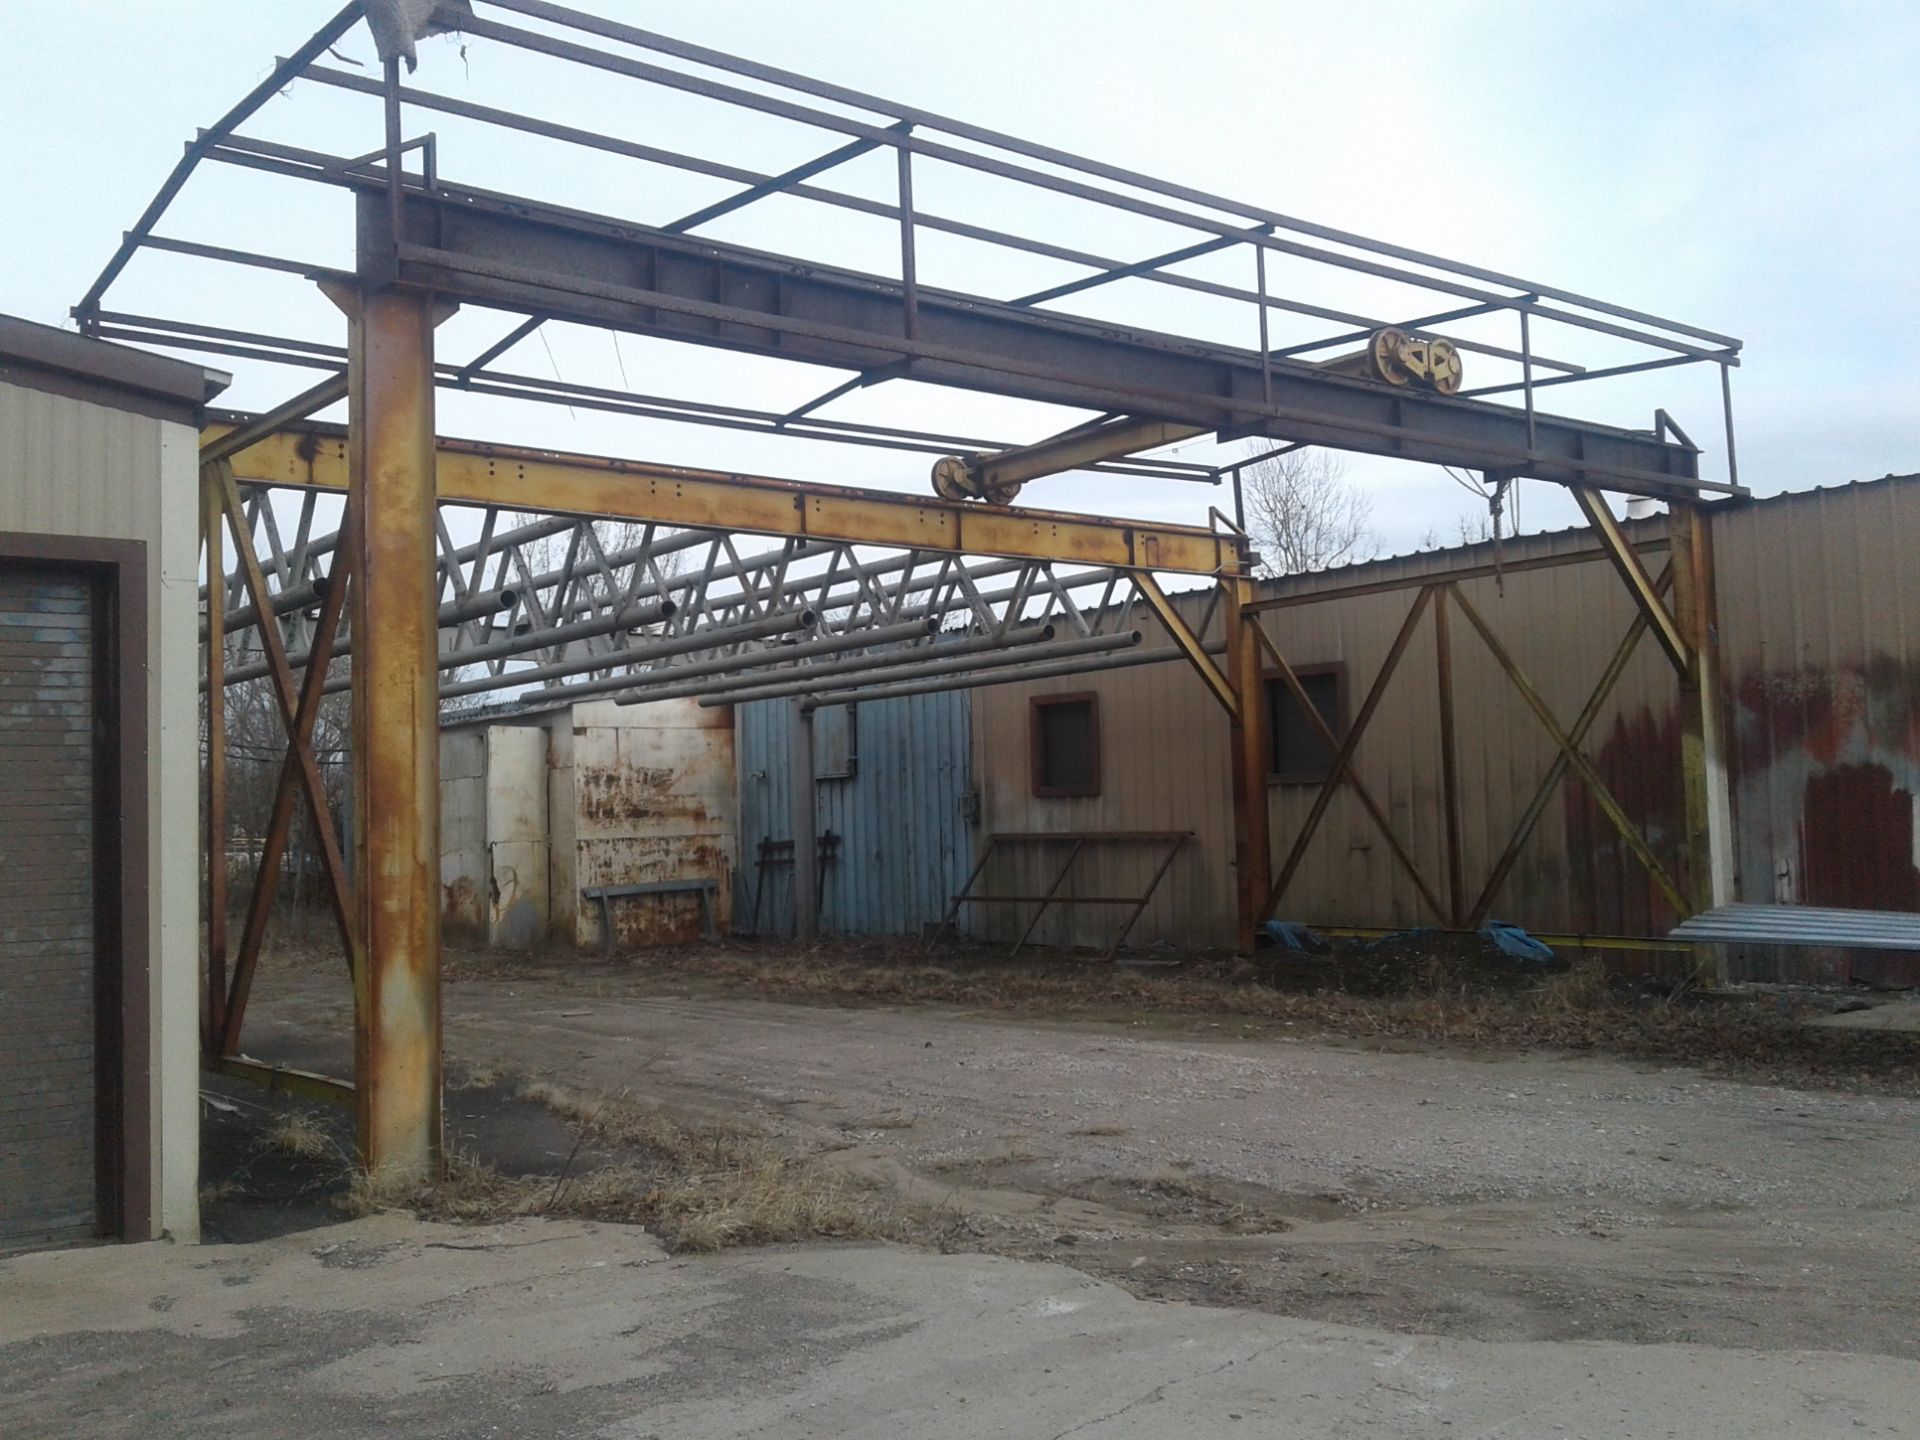 OUTDOOR FREE STANDING CRANE, APPROX 40' X 20', WITH OVERHEAD STEEL TROLLY - Image 2 of 8